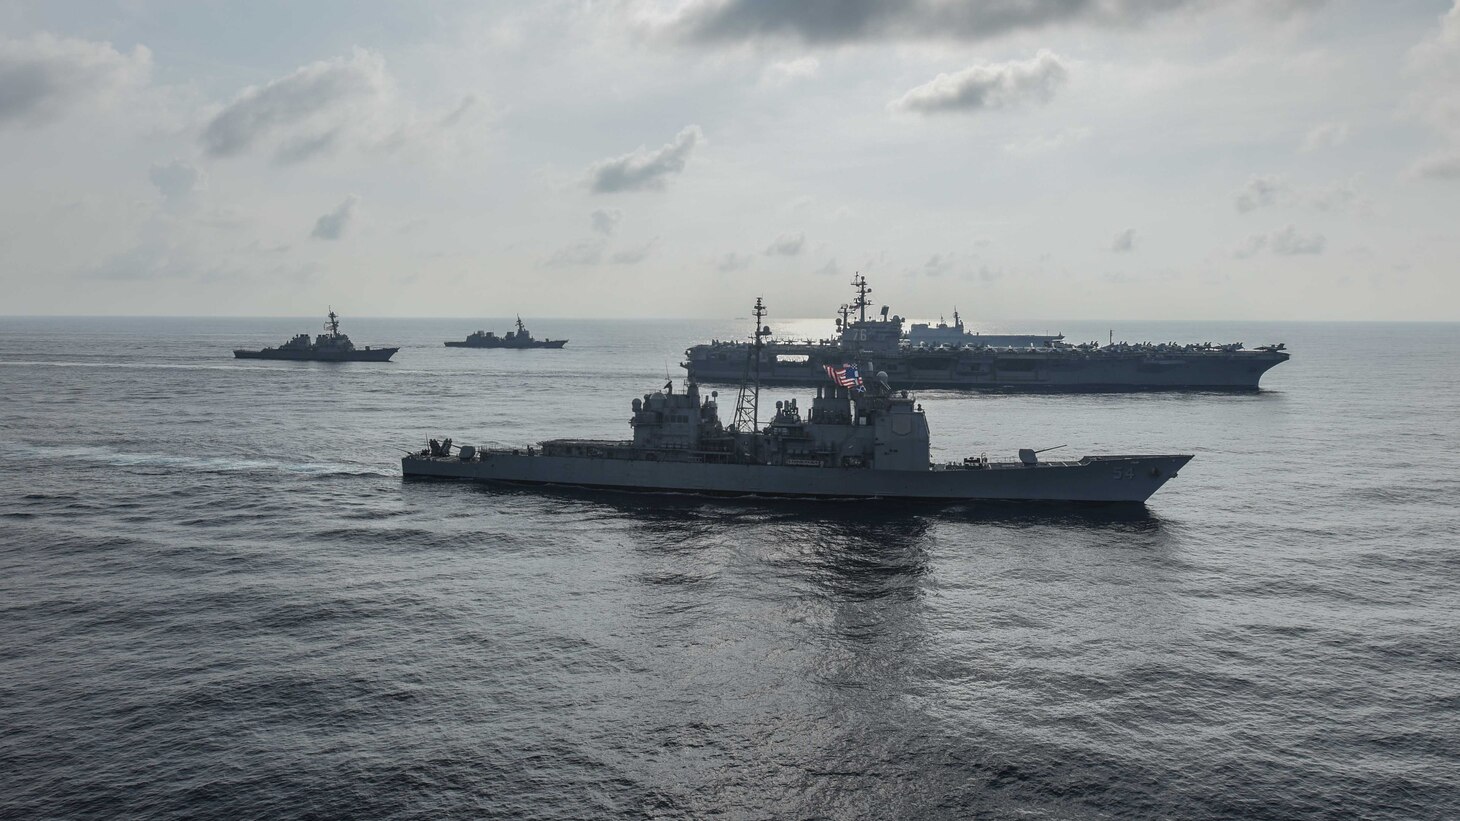 SOUTH CHINA SEA (Aug. 31, 2018) The Ronald Reagan Strike Group ship's aircraft carrier USS Ronald Reagan (CVN 76), the guided-missile destroyer USS Antietam (CG 54) and the guided-missile destroyer USS Milius (DDG 69) conduct a photo exercise with the Japanese Maritime Self-Defense Force ship's the helicopter destroyer JS Kaga (DDH 184), the destroyer JS Inazuma (DD 105) and the destroyer JS Suzutsuki (DD 117). The Ronald Reagan Strike Group is forward-deployed to the U.S. 7th Fleet area of operations in support of security and stability in the Indo-Pacific region.